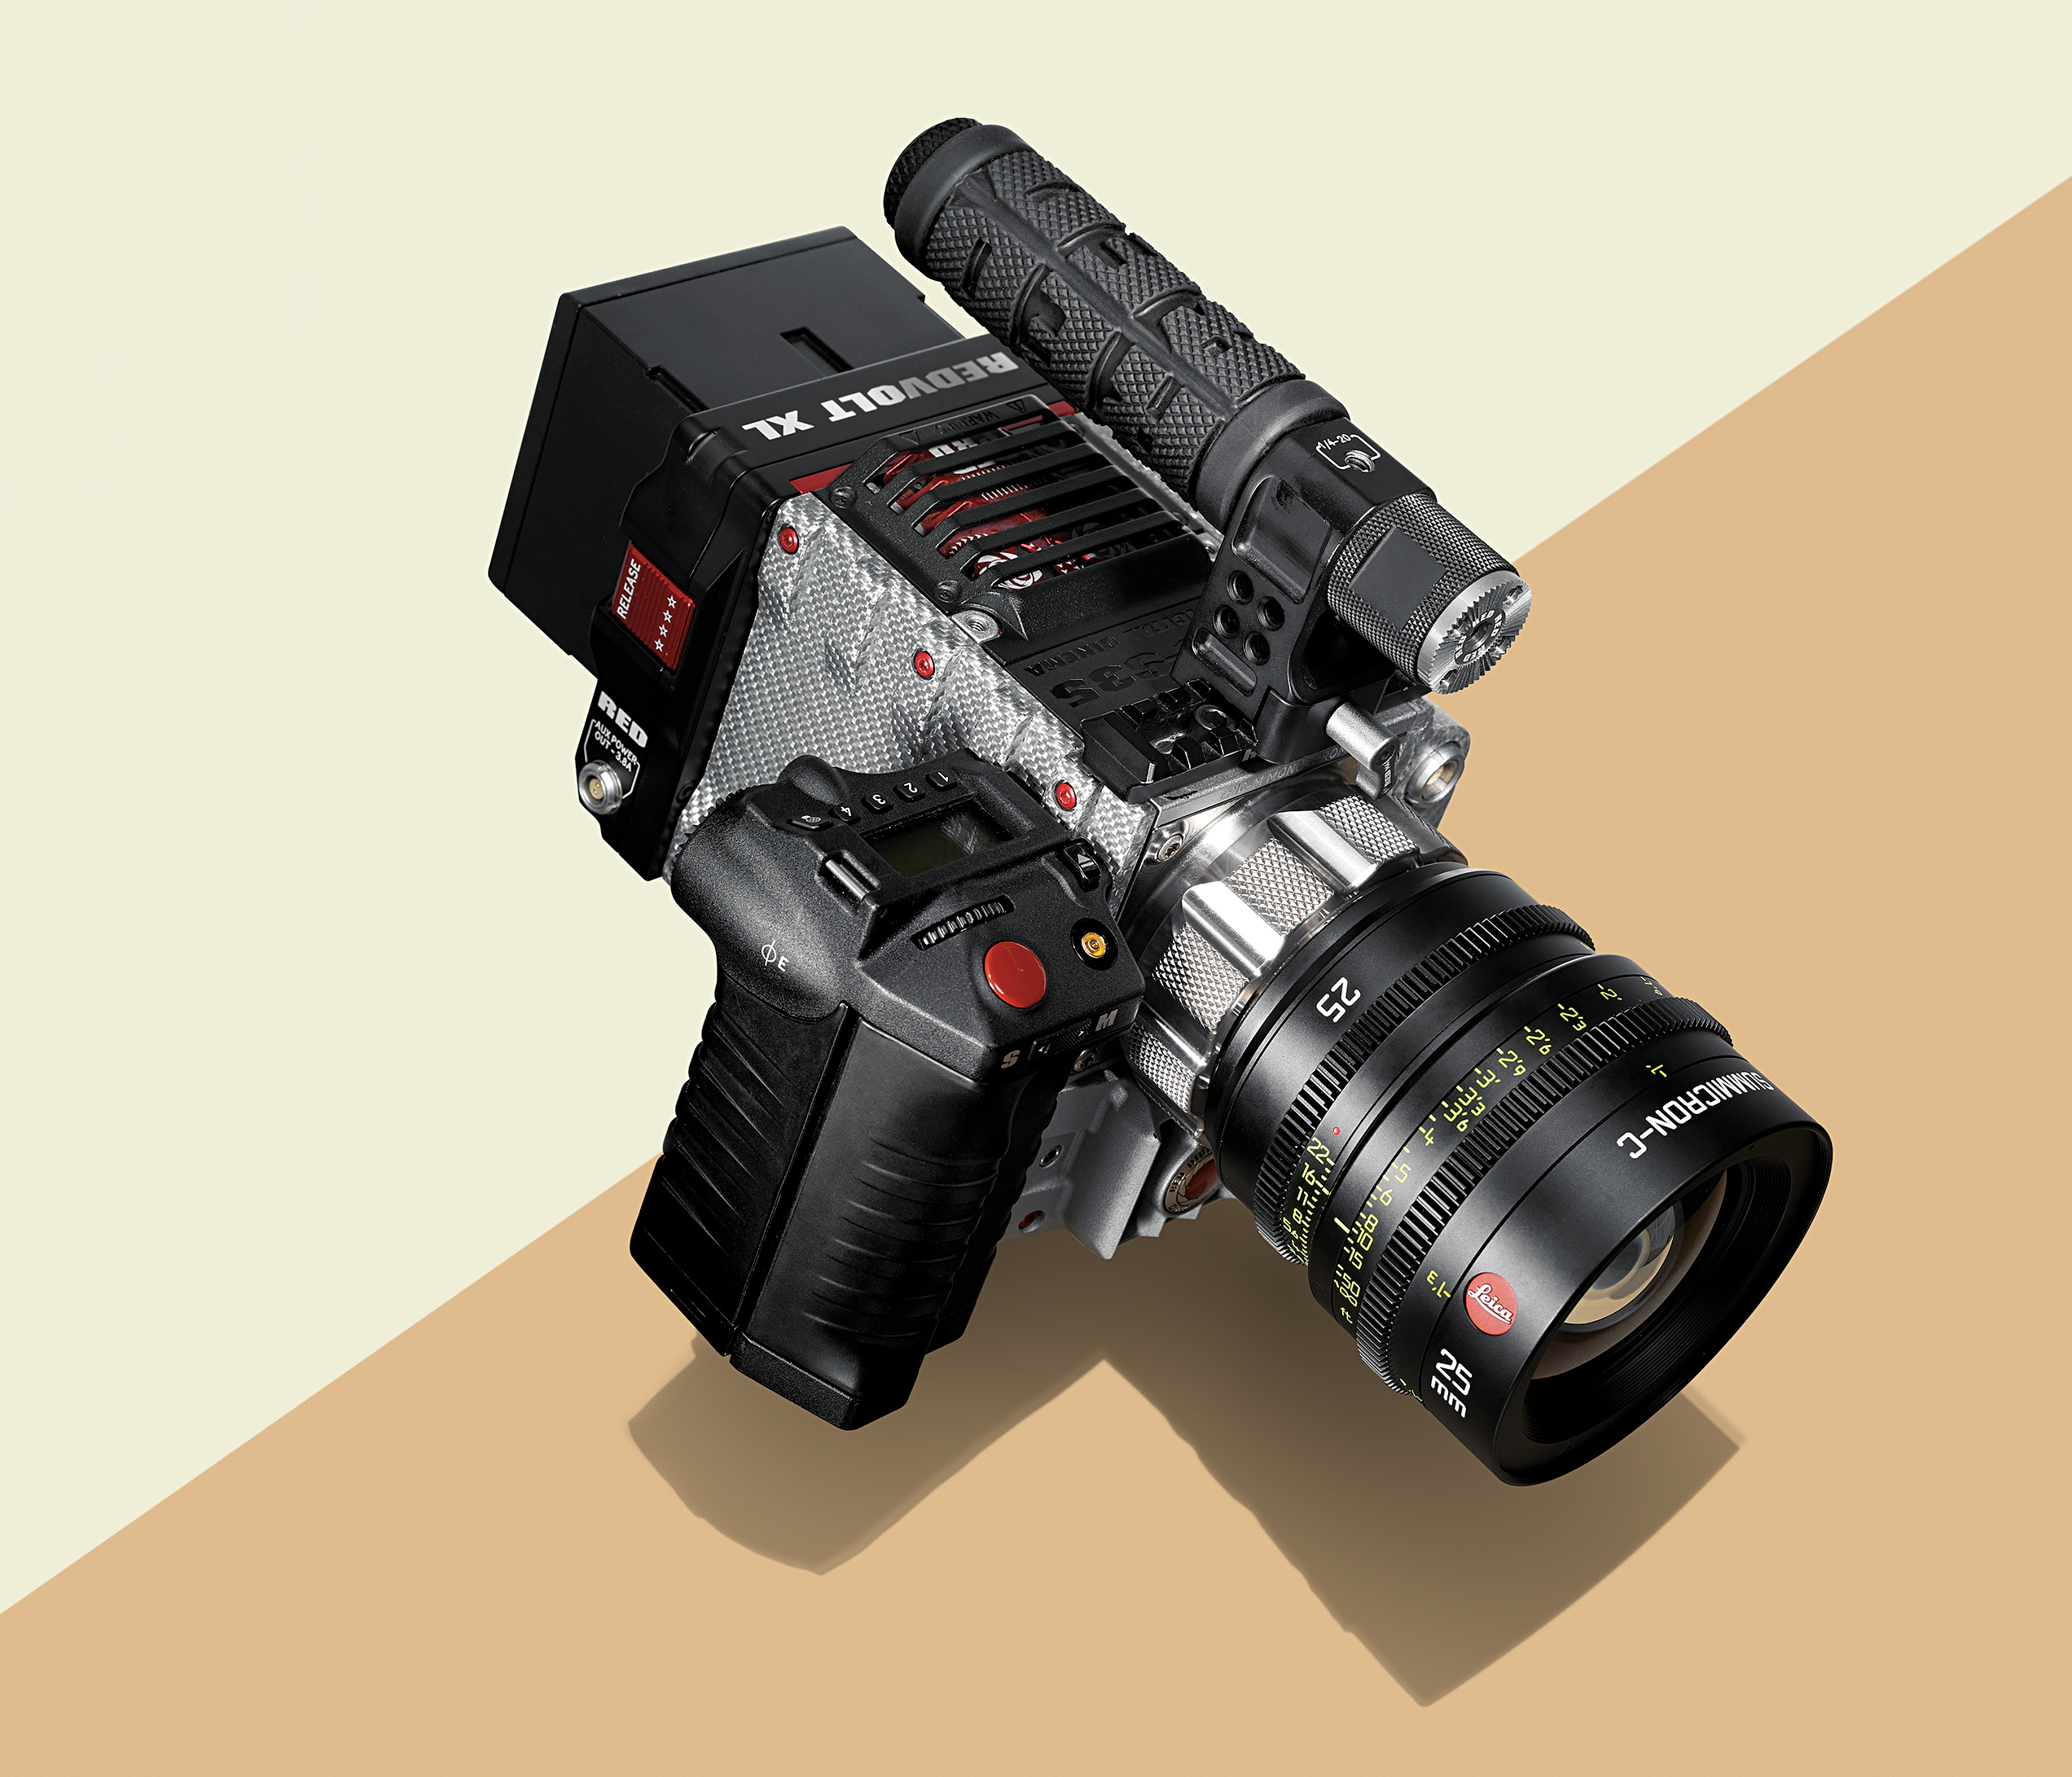 The Red Weapon 6K Camera Shoots For The Stars